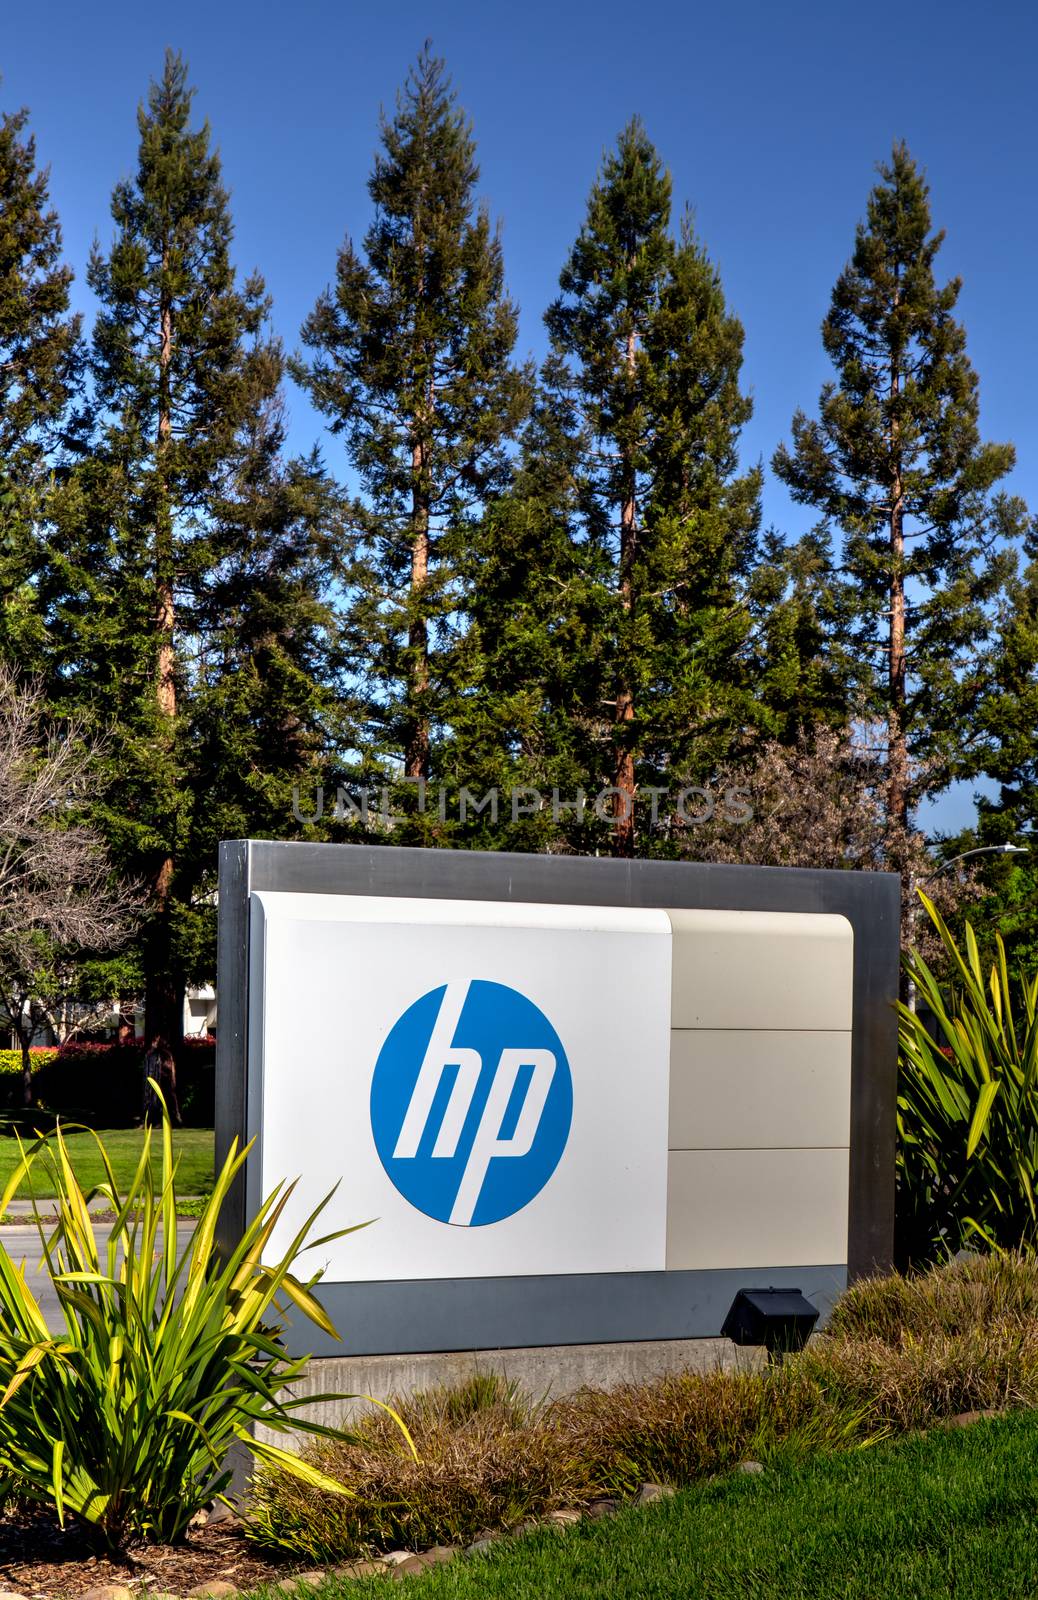 Hewlett-Packard corporate headquarters in Silicon Valley by wolterk